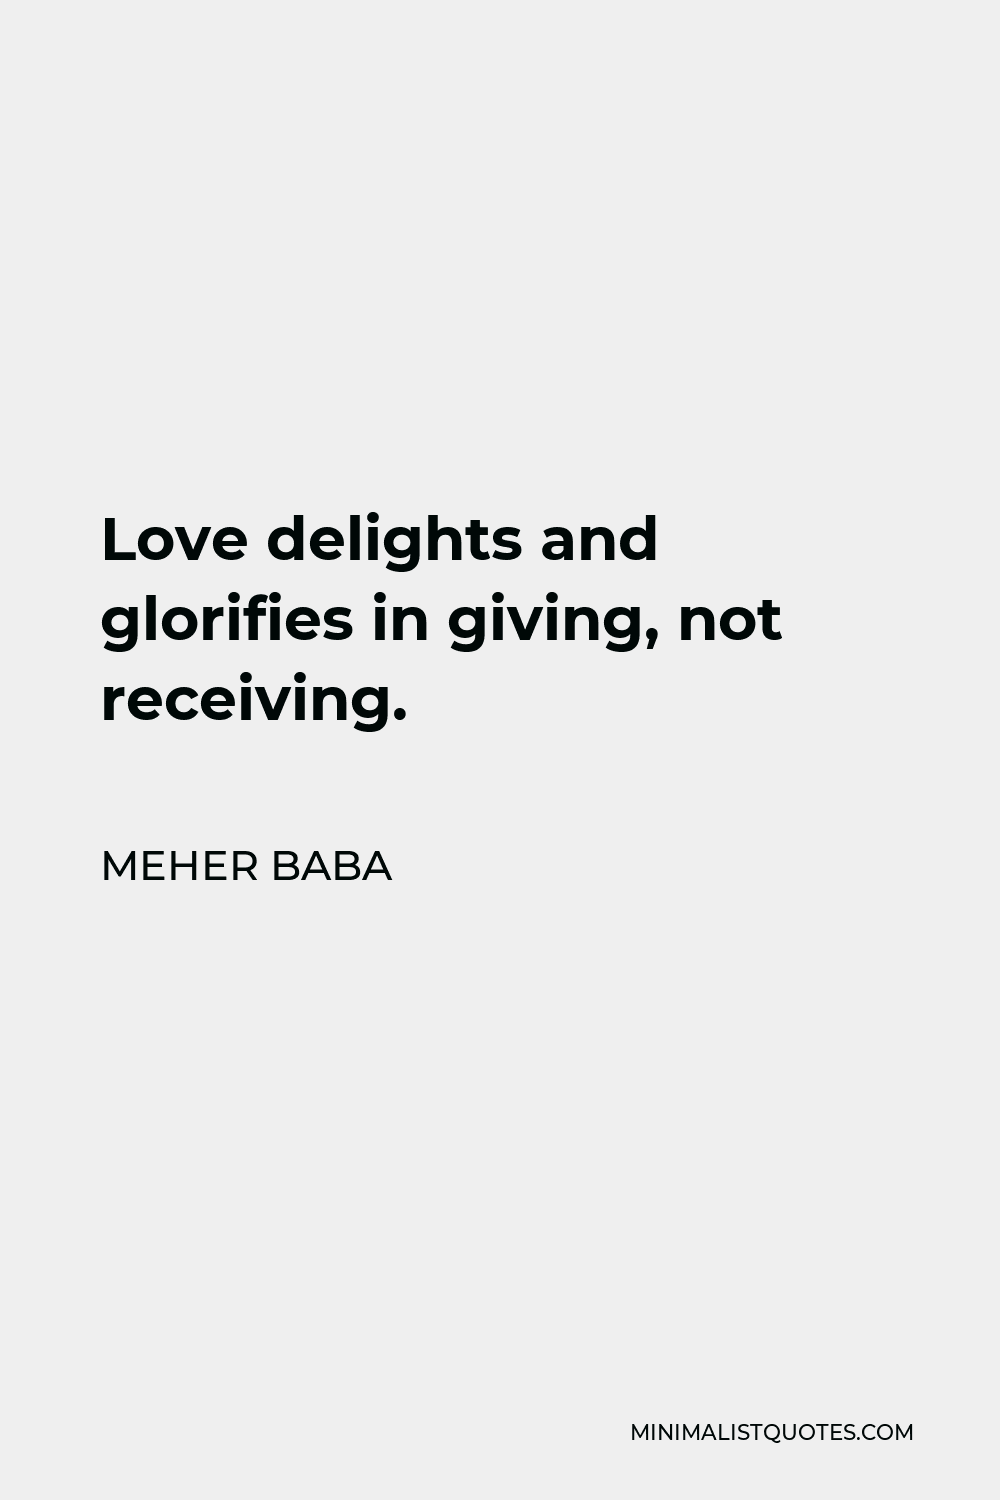 Meher Baba Quote - Love delights and glorifies in giving, not receiving.